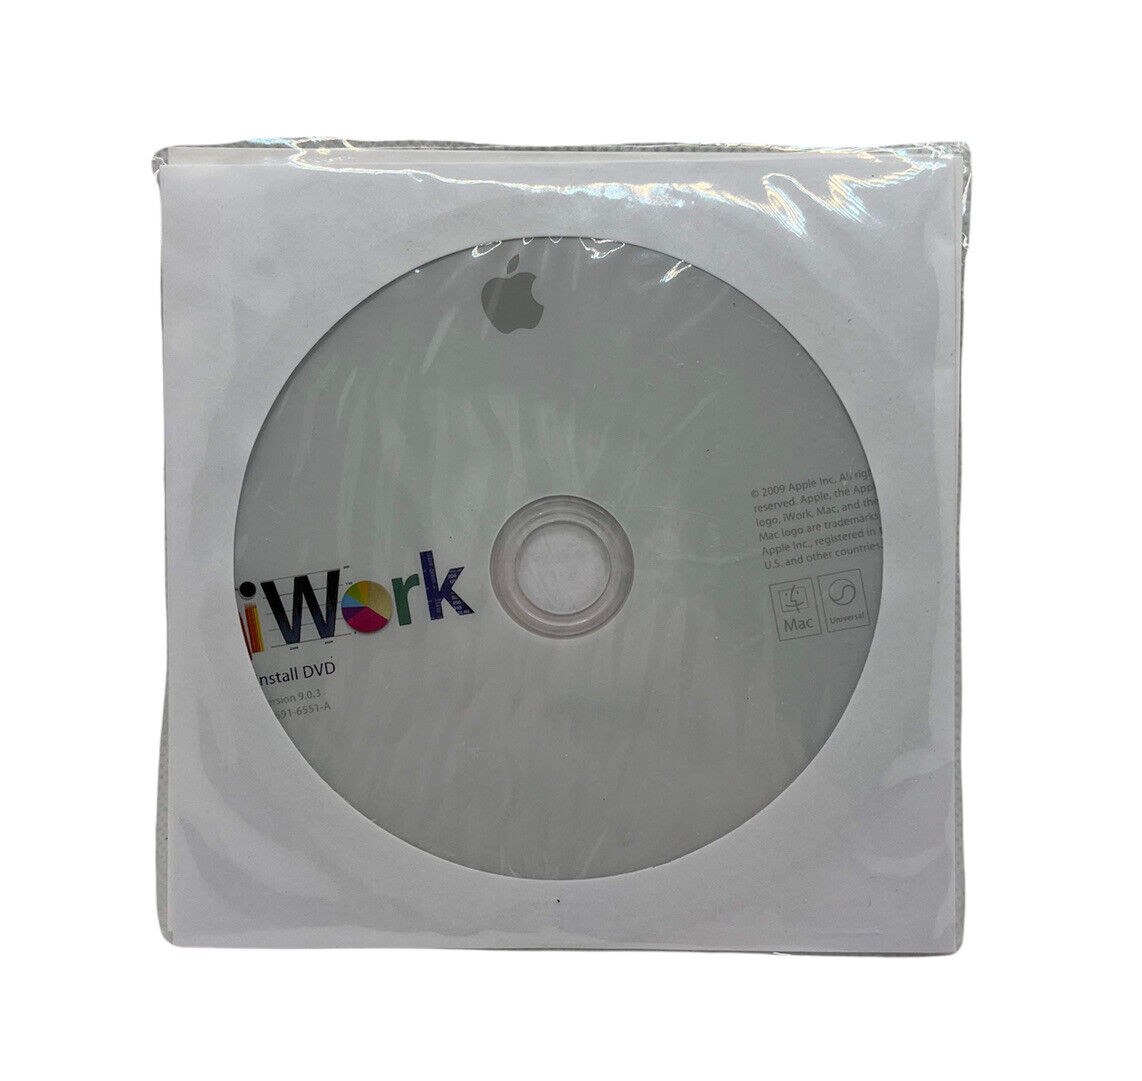 Apple iWork 2009 Install DVD Version 9.0.3, New Factory Sealed Disc 034-5239-A